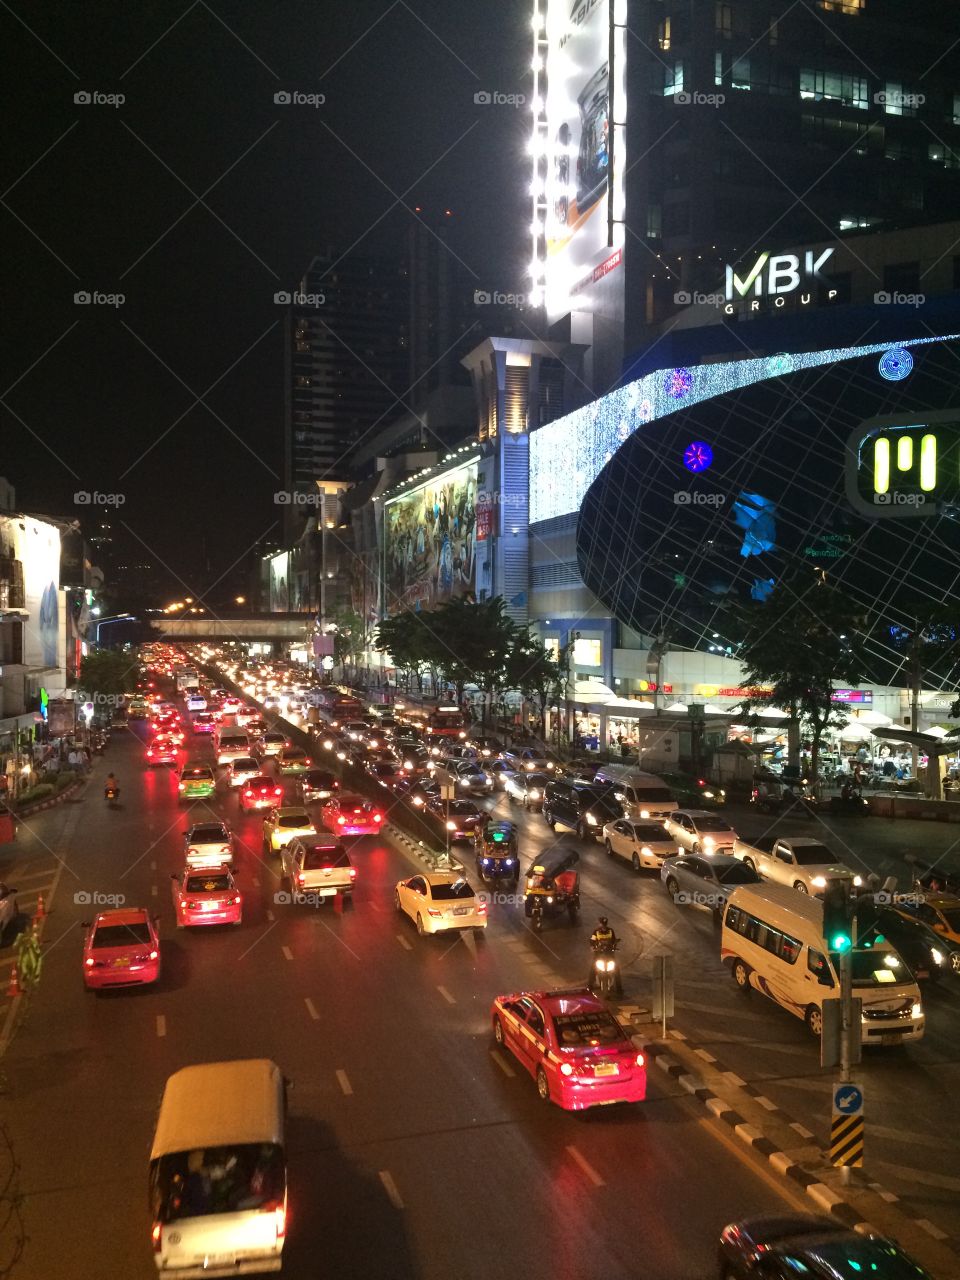 Bangkok, Thailand (MBK mall): hustle and bustle of street at night with taxis and motorbikes